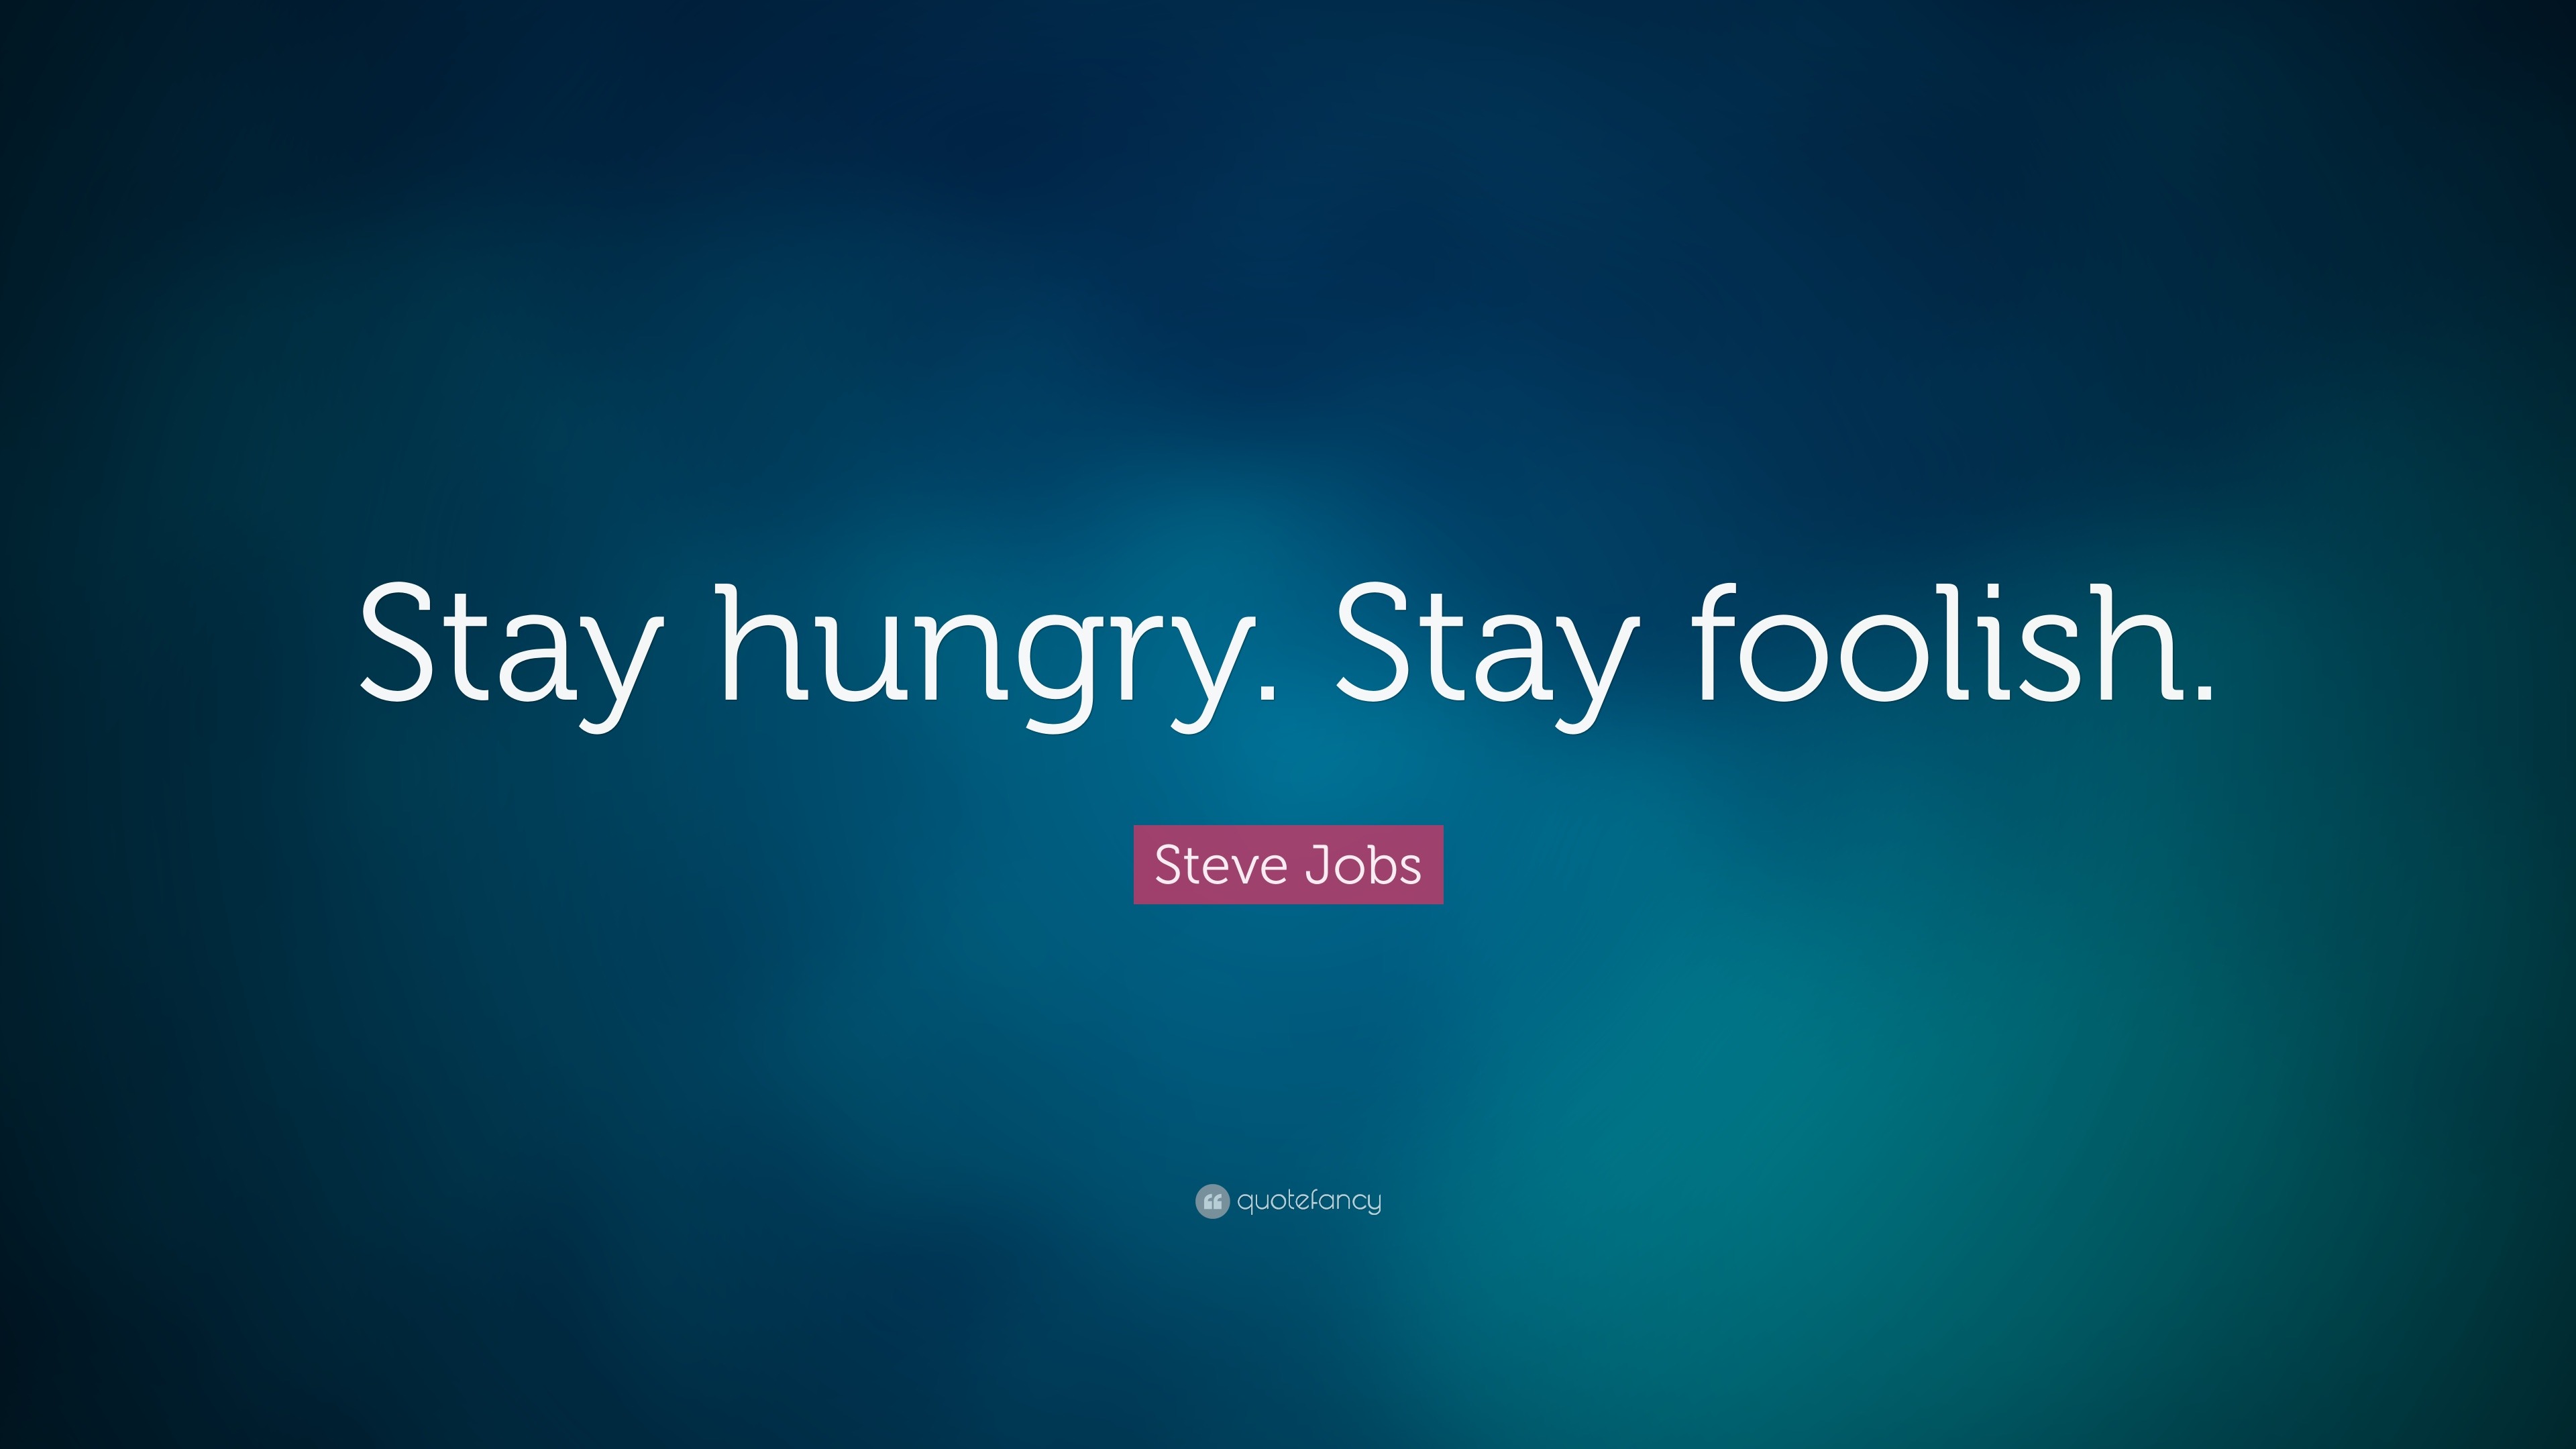 Stay hungry stay foolish wallpaper